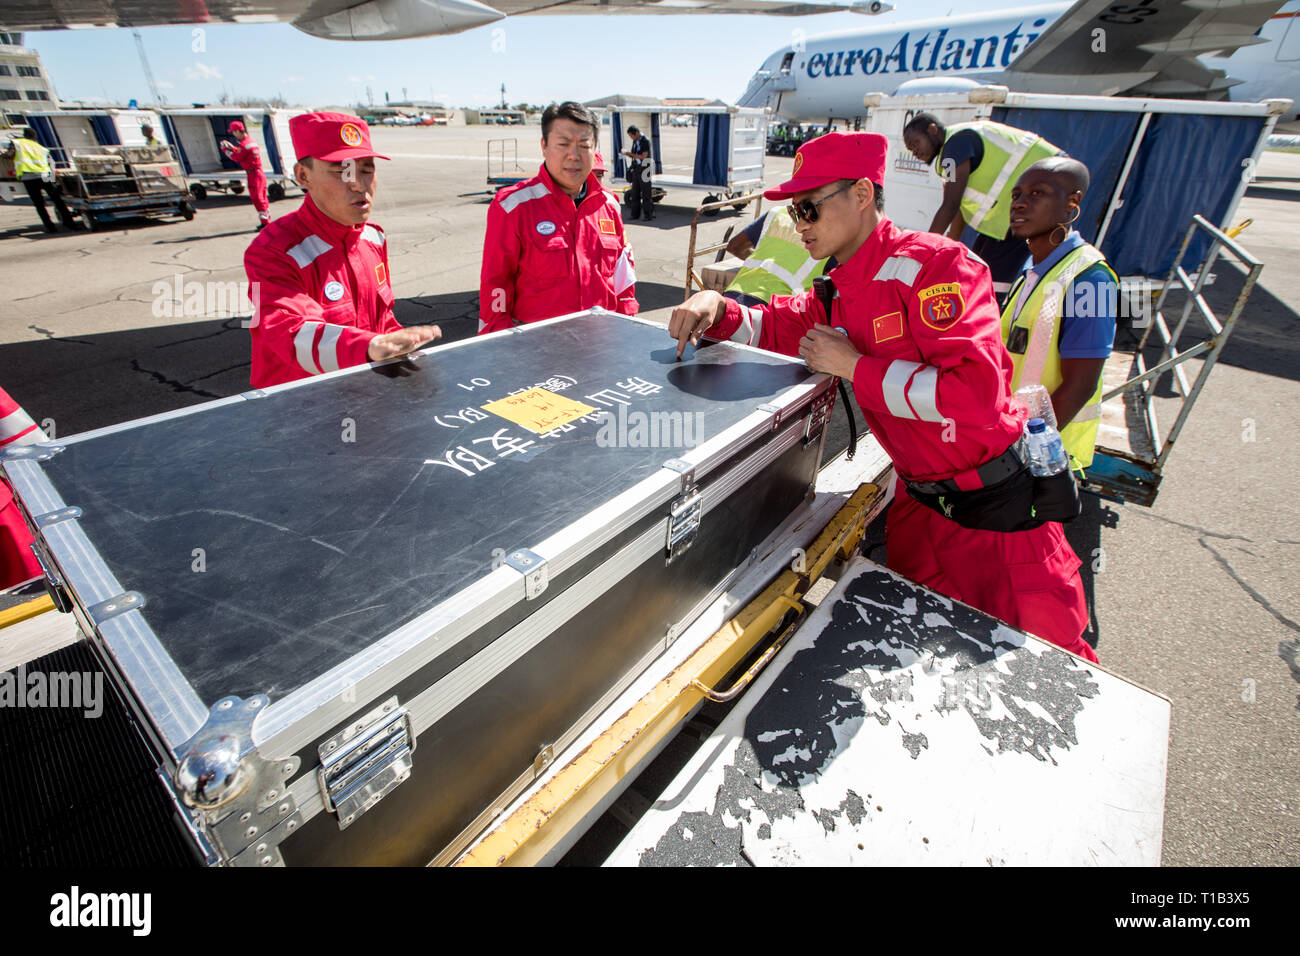 Beira, Mozambique. 25th Mar, 2019. Chinese rescue team members transfer the newly-arrived equipment and materials at Beira International Airport, Beira, Mozambique, on March 25, 2019. A Chinese rescue team comprised of 65 members arrived at Beira International Airport in Mozambique on Monday after Cyclone Idai wreaked havoc in the southeastern African country. Credit: Zhang Yu/Xinhua/Alamy Live News Stock Photo